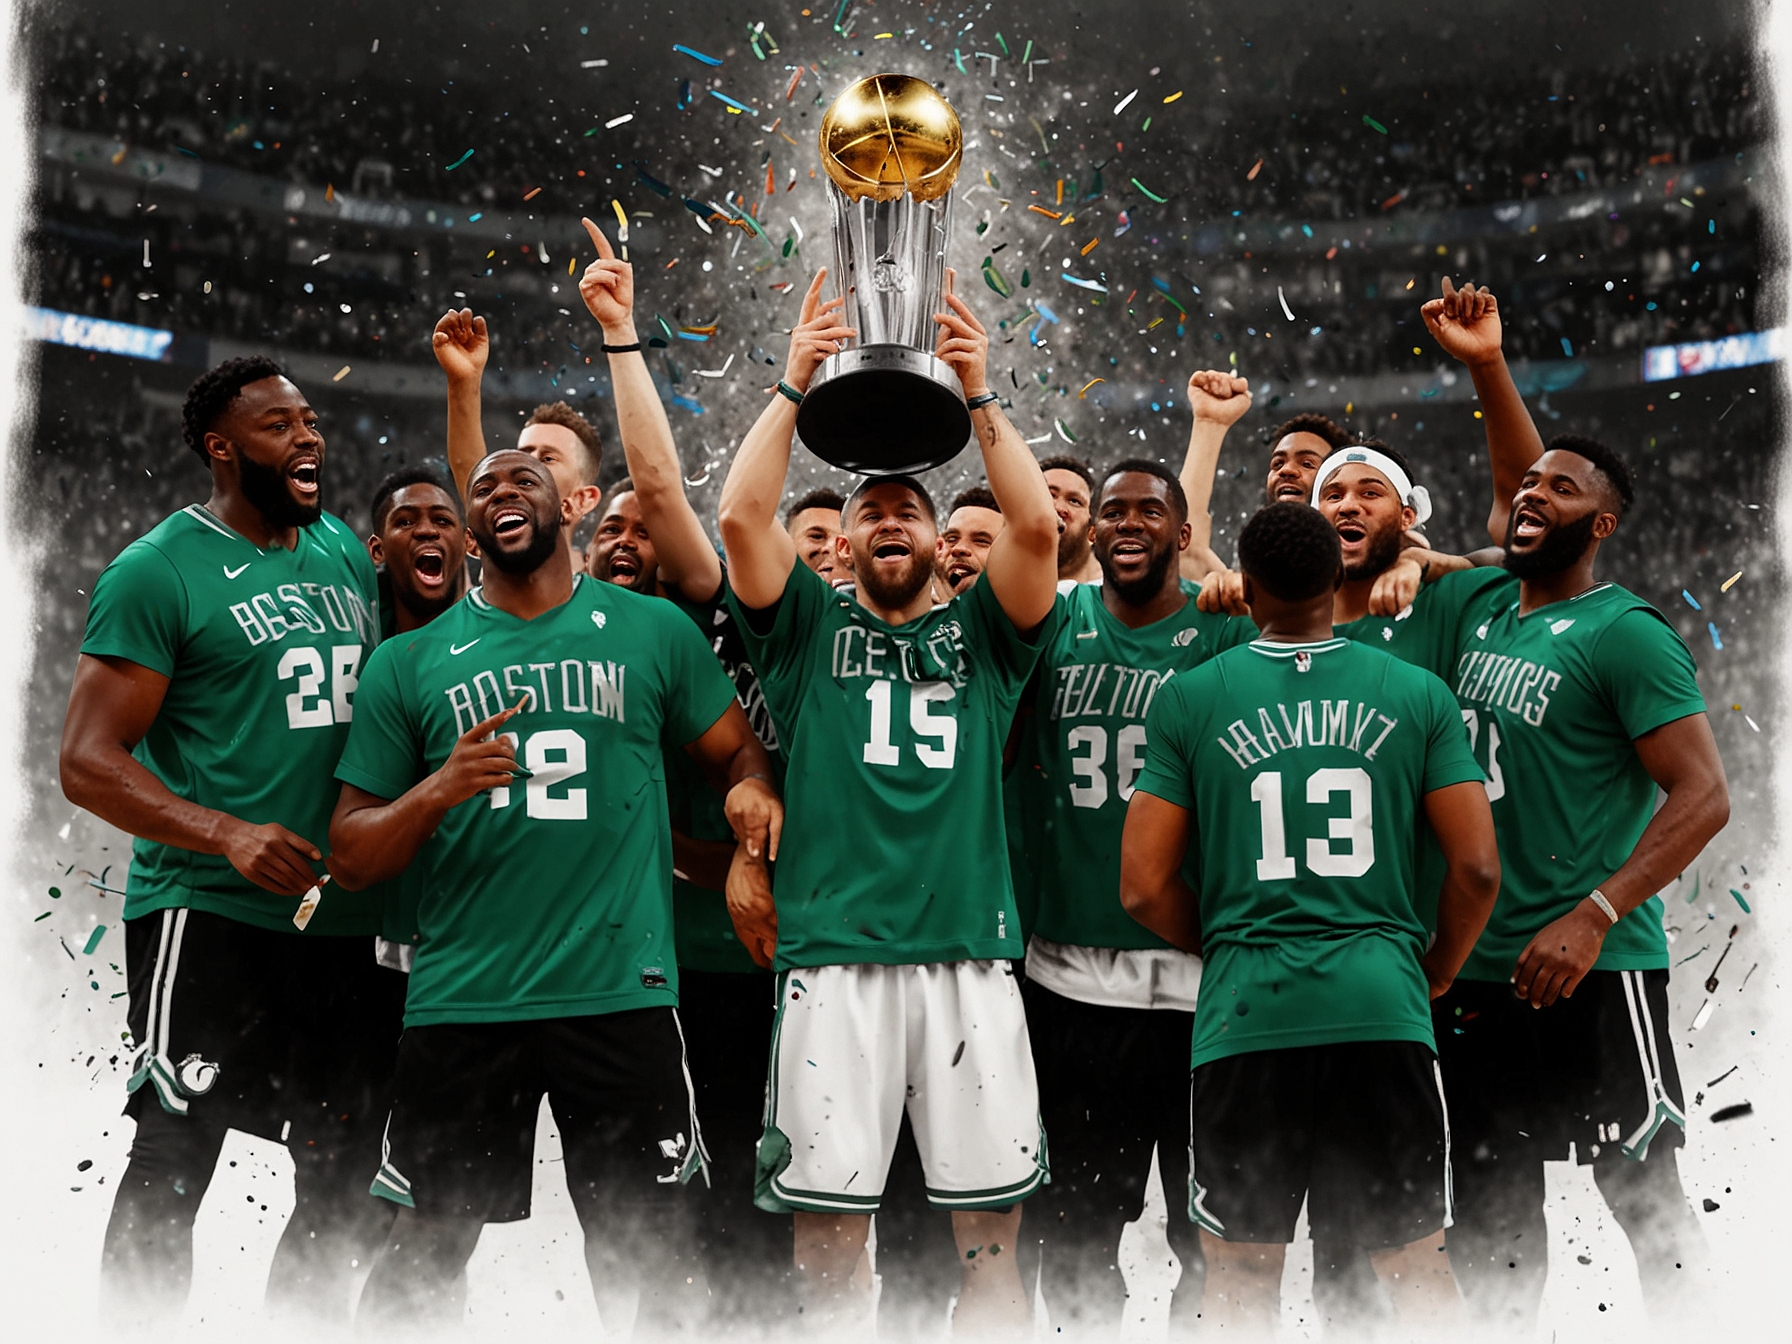 The Boston Celtics team, holding the NBA championship trophy high in celebration, surrounded by confetti, epitomize their victory and the 19th title in franchise history.